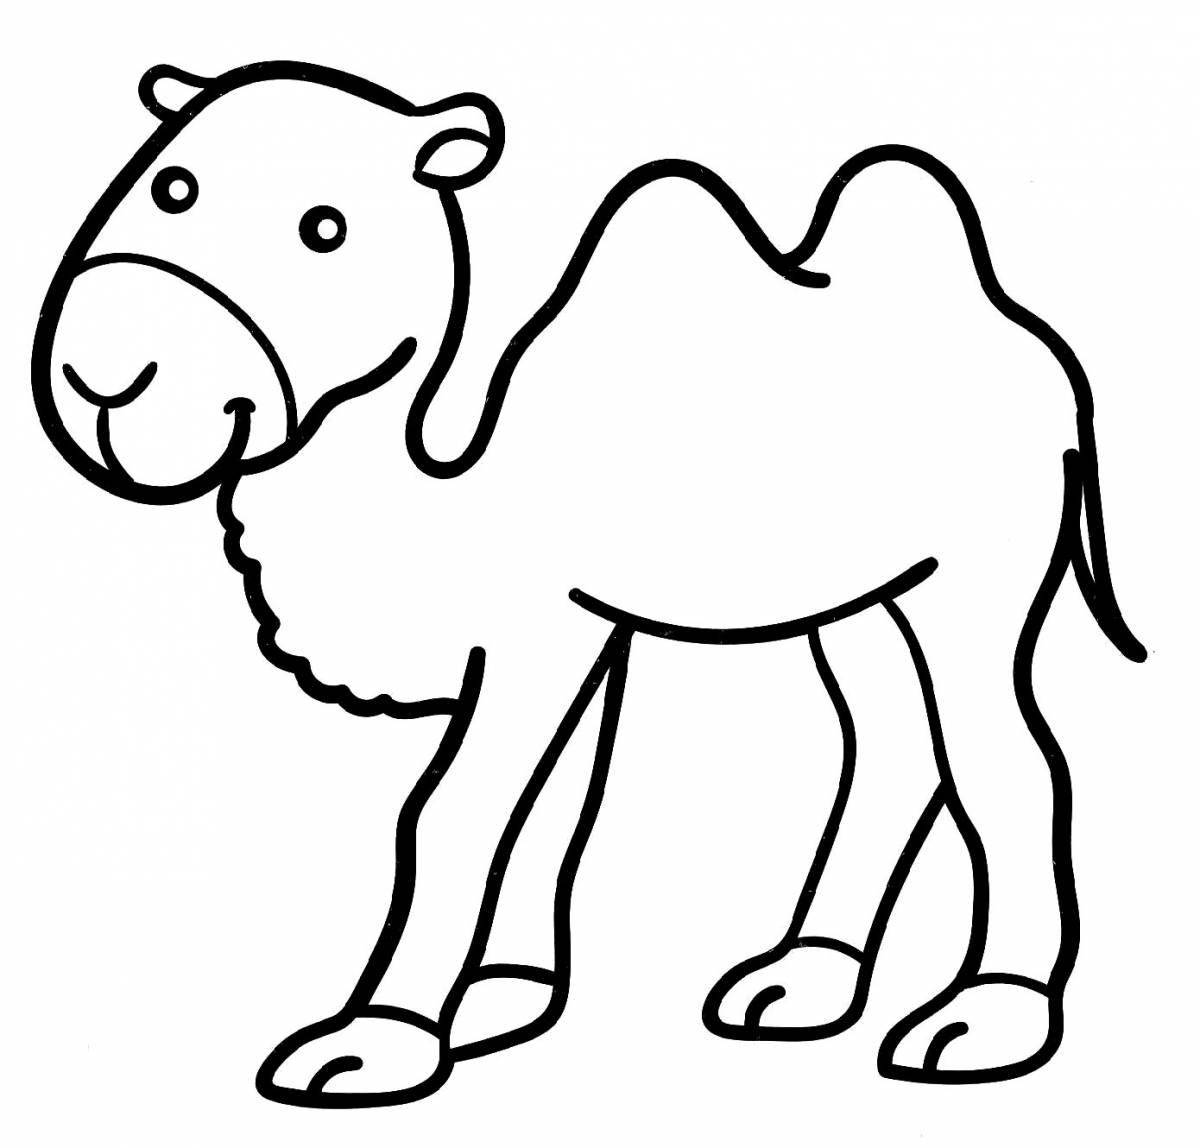 A fun camel coloring book for 6-7 year olds